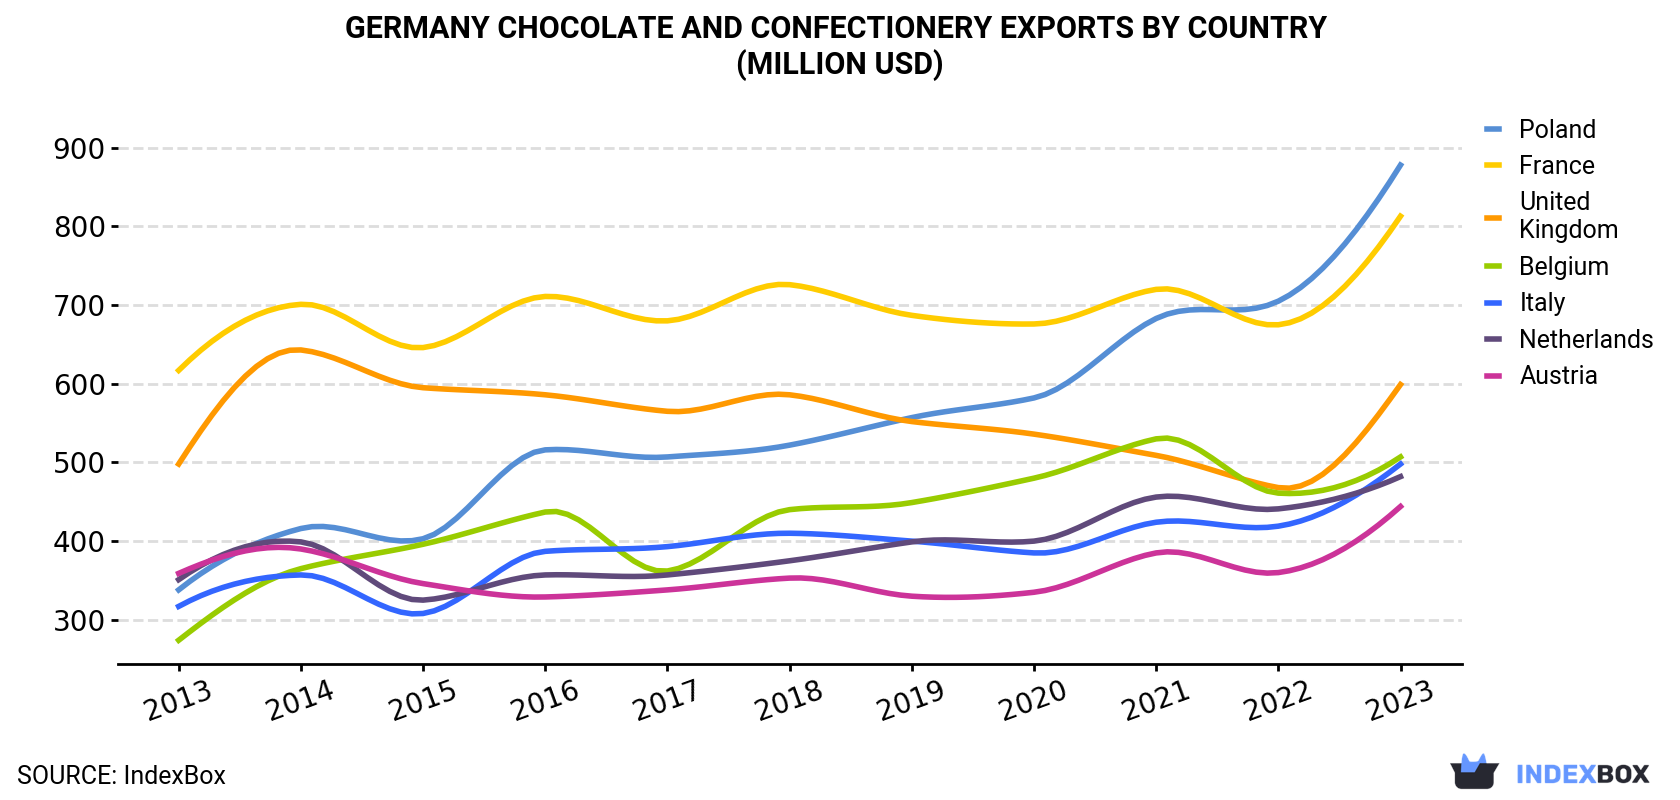 Germany Chocolate And Confectionery Exports By Country (Million USD)